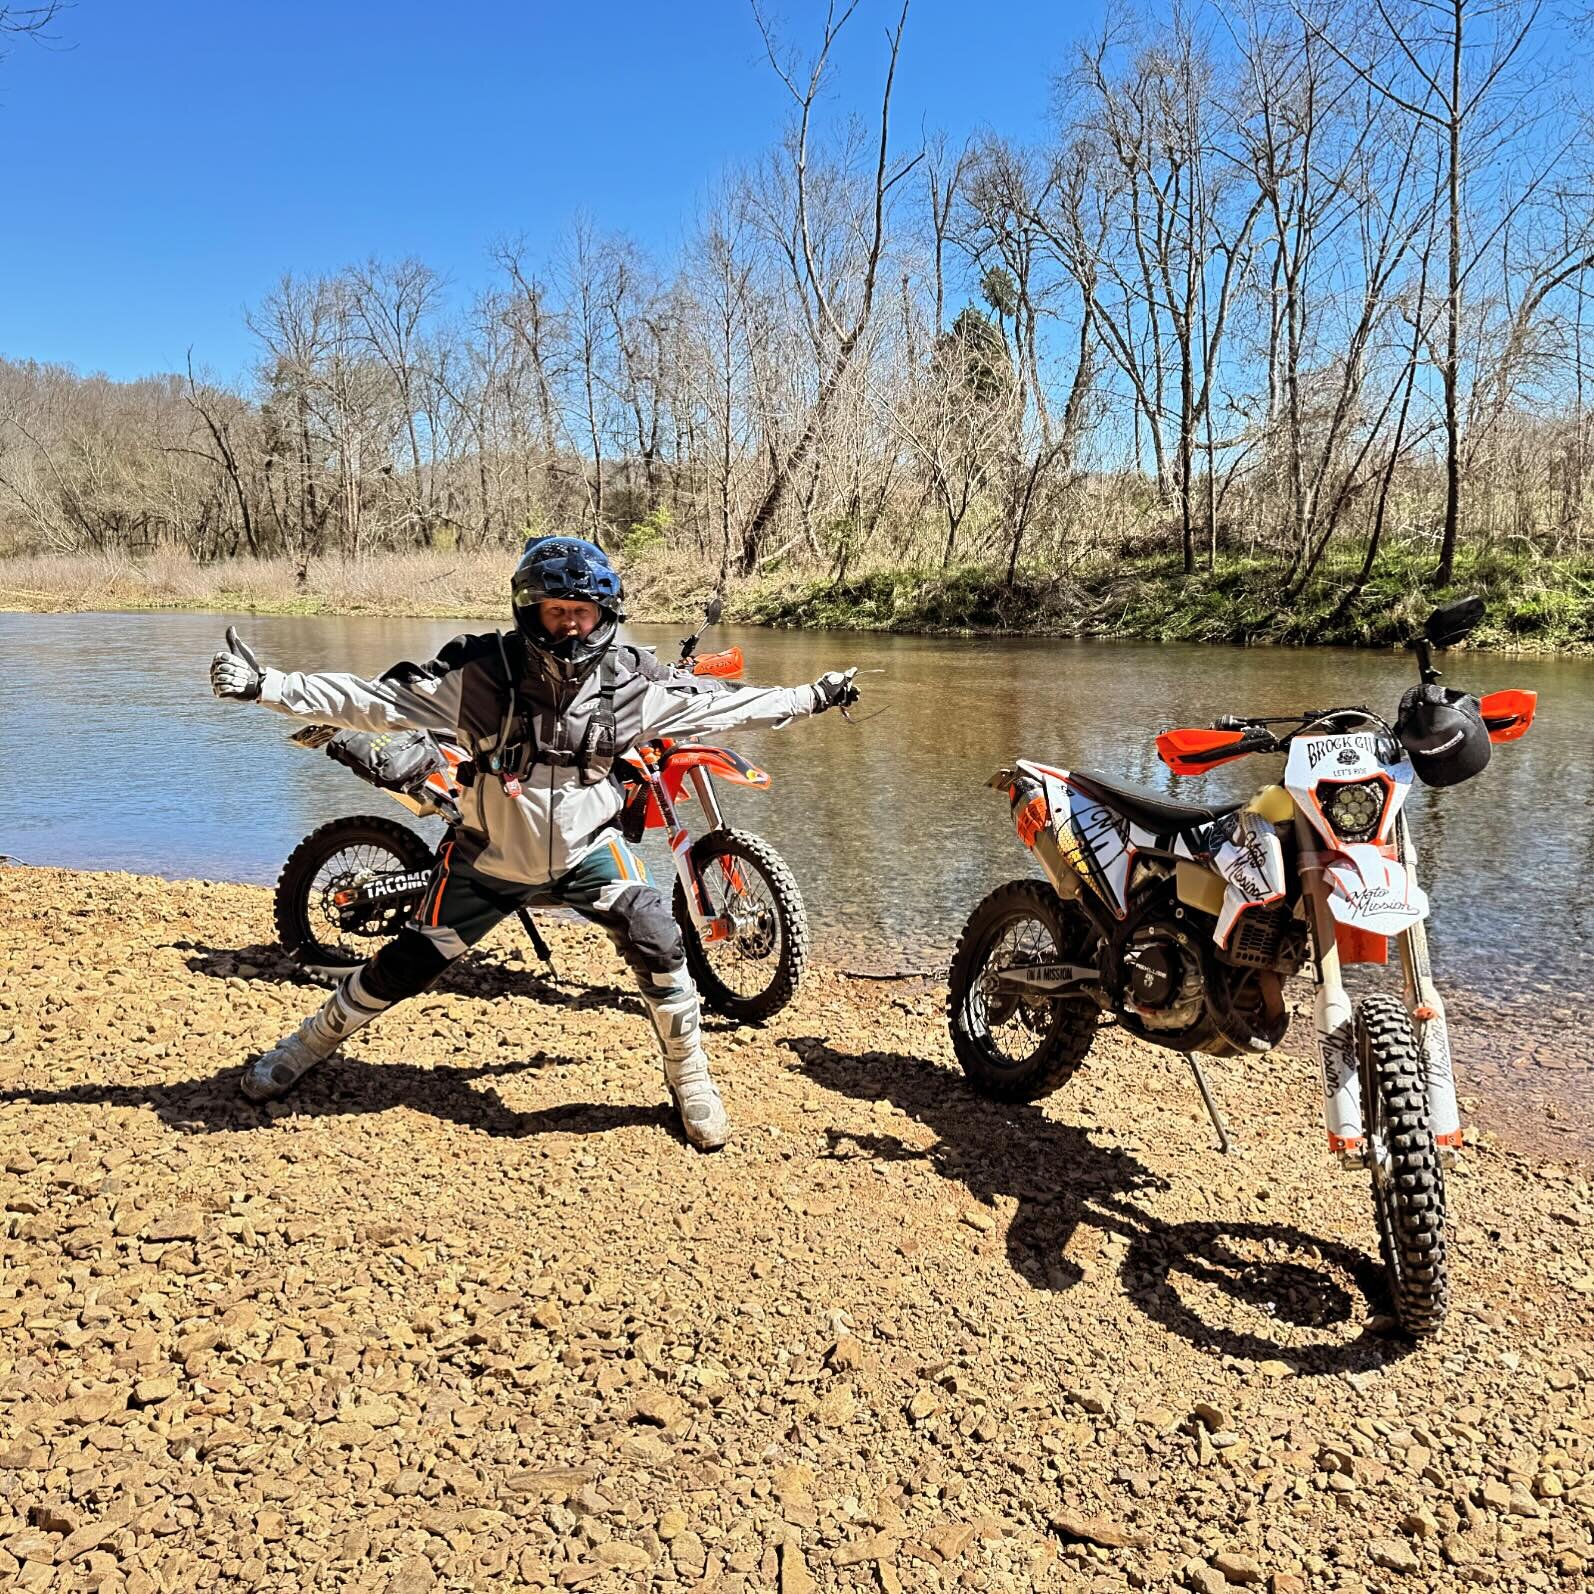 154 miles of epic riding w @tfurgusonktm 
We created a new route. Could not be more excited 

Thanks to @ssidecals for making it look good. 
Thanks to @cardosystems for the ability to have communication while we ride
Thanks to @slavensracing for the 